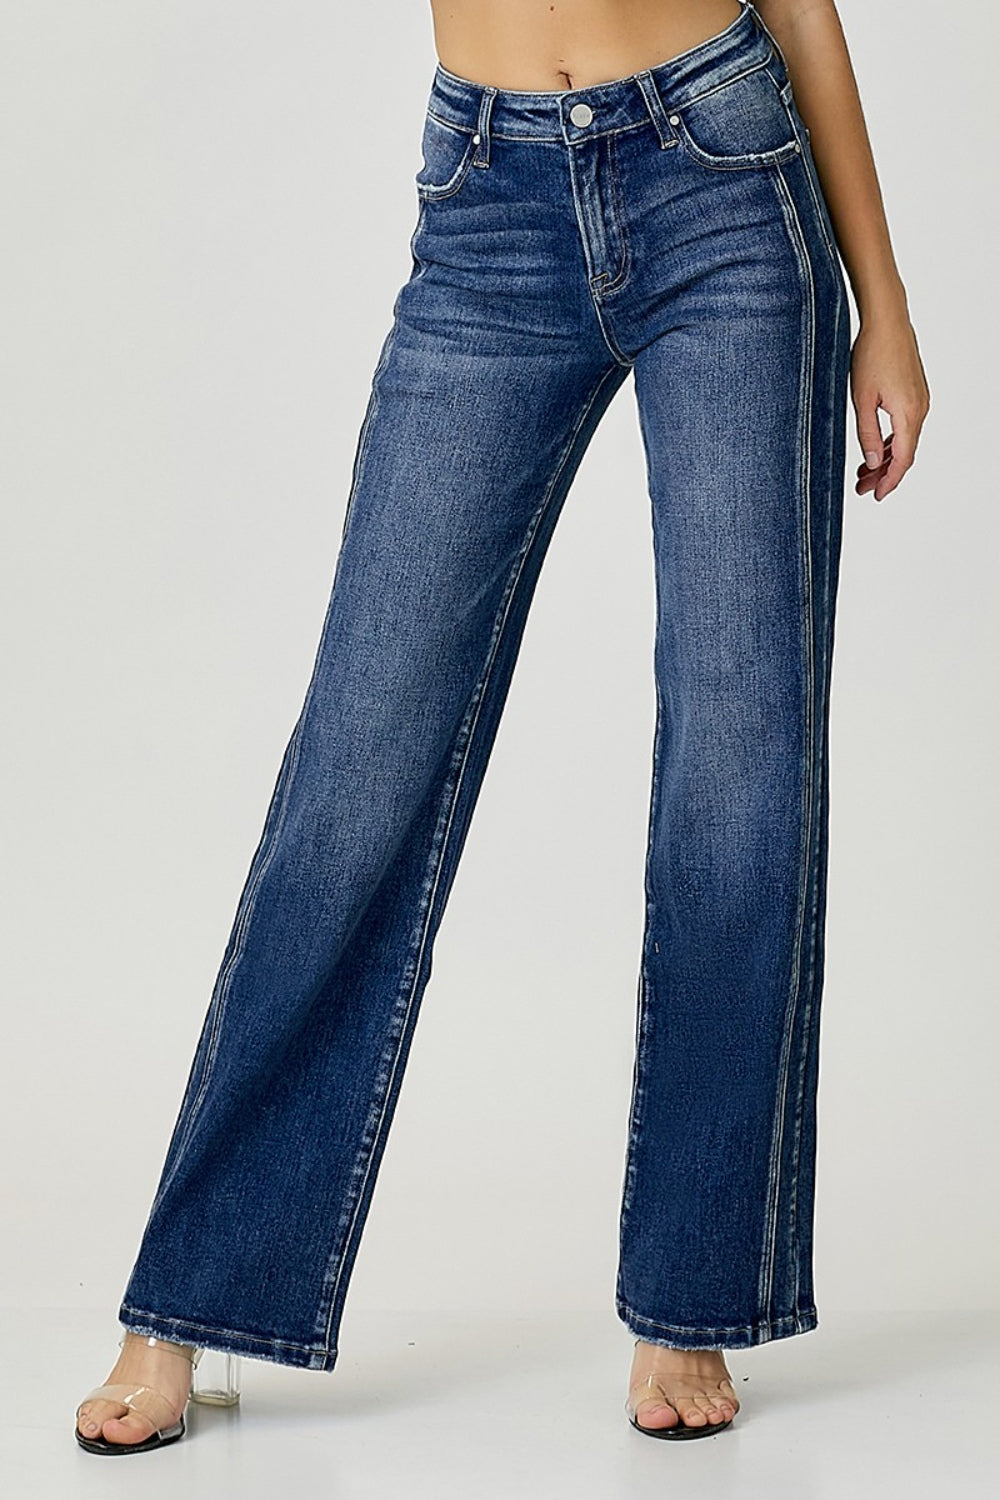 RISEN Mid Rise Straight Jeans-Denim-Inspired by Justeen-Women's Clothing Boutique in Chicago, Illinois